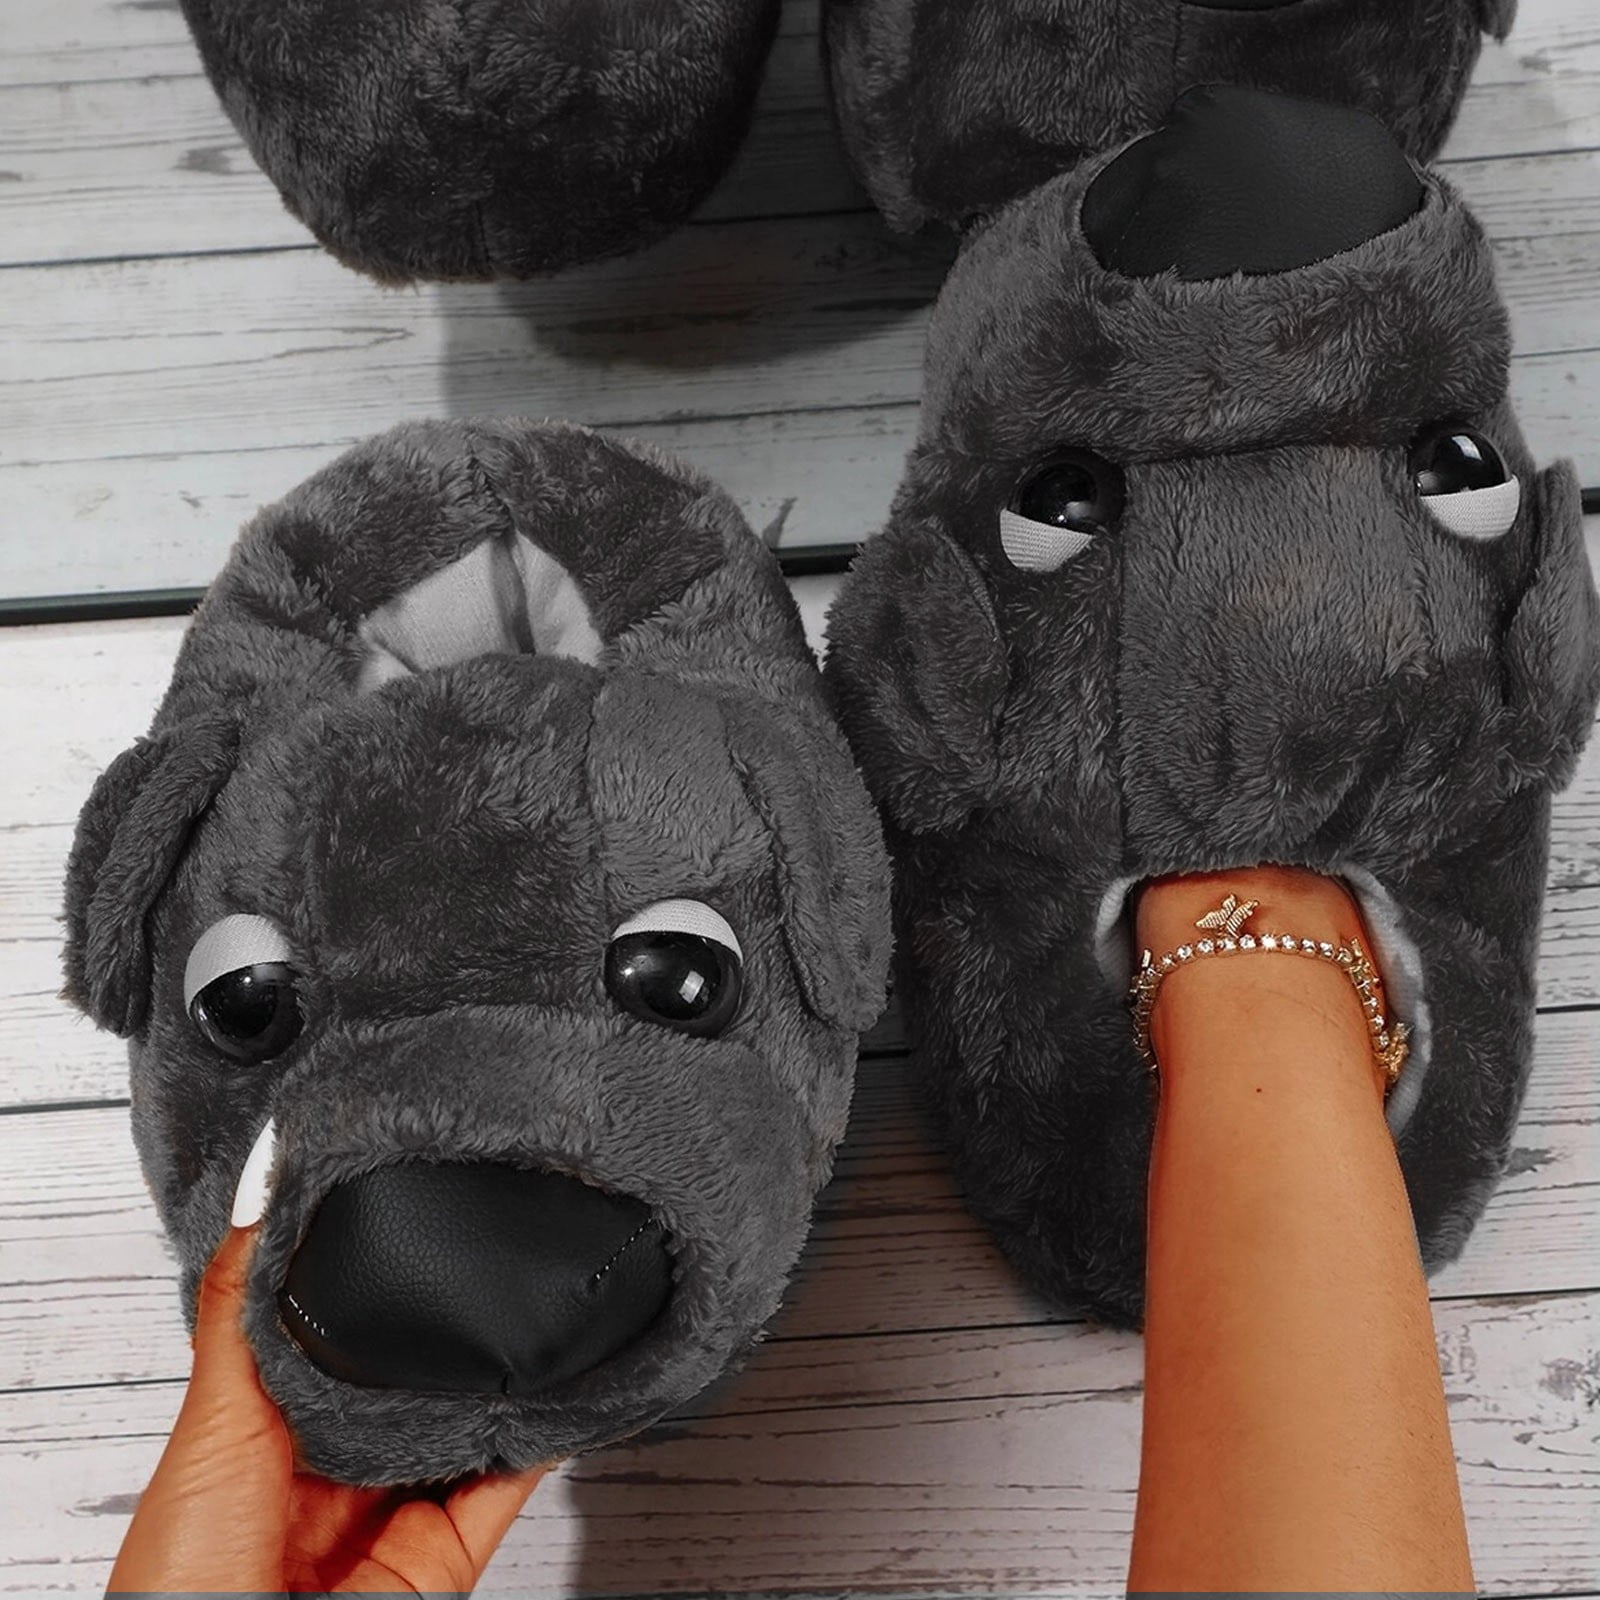 Daznico Slippers for Women Dog Design Slippers For Men Cute Soft Animal Funny Home Indoor Winter Warm Floor Shoes Grey 9 - Walmart.com